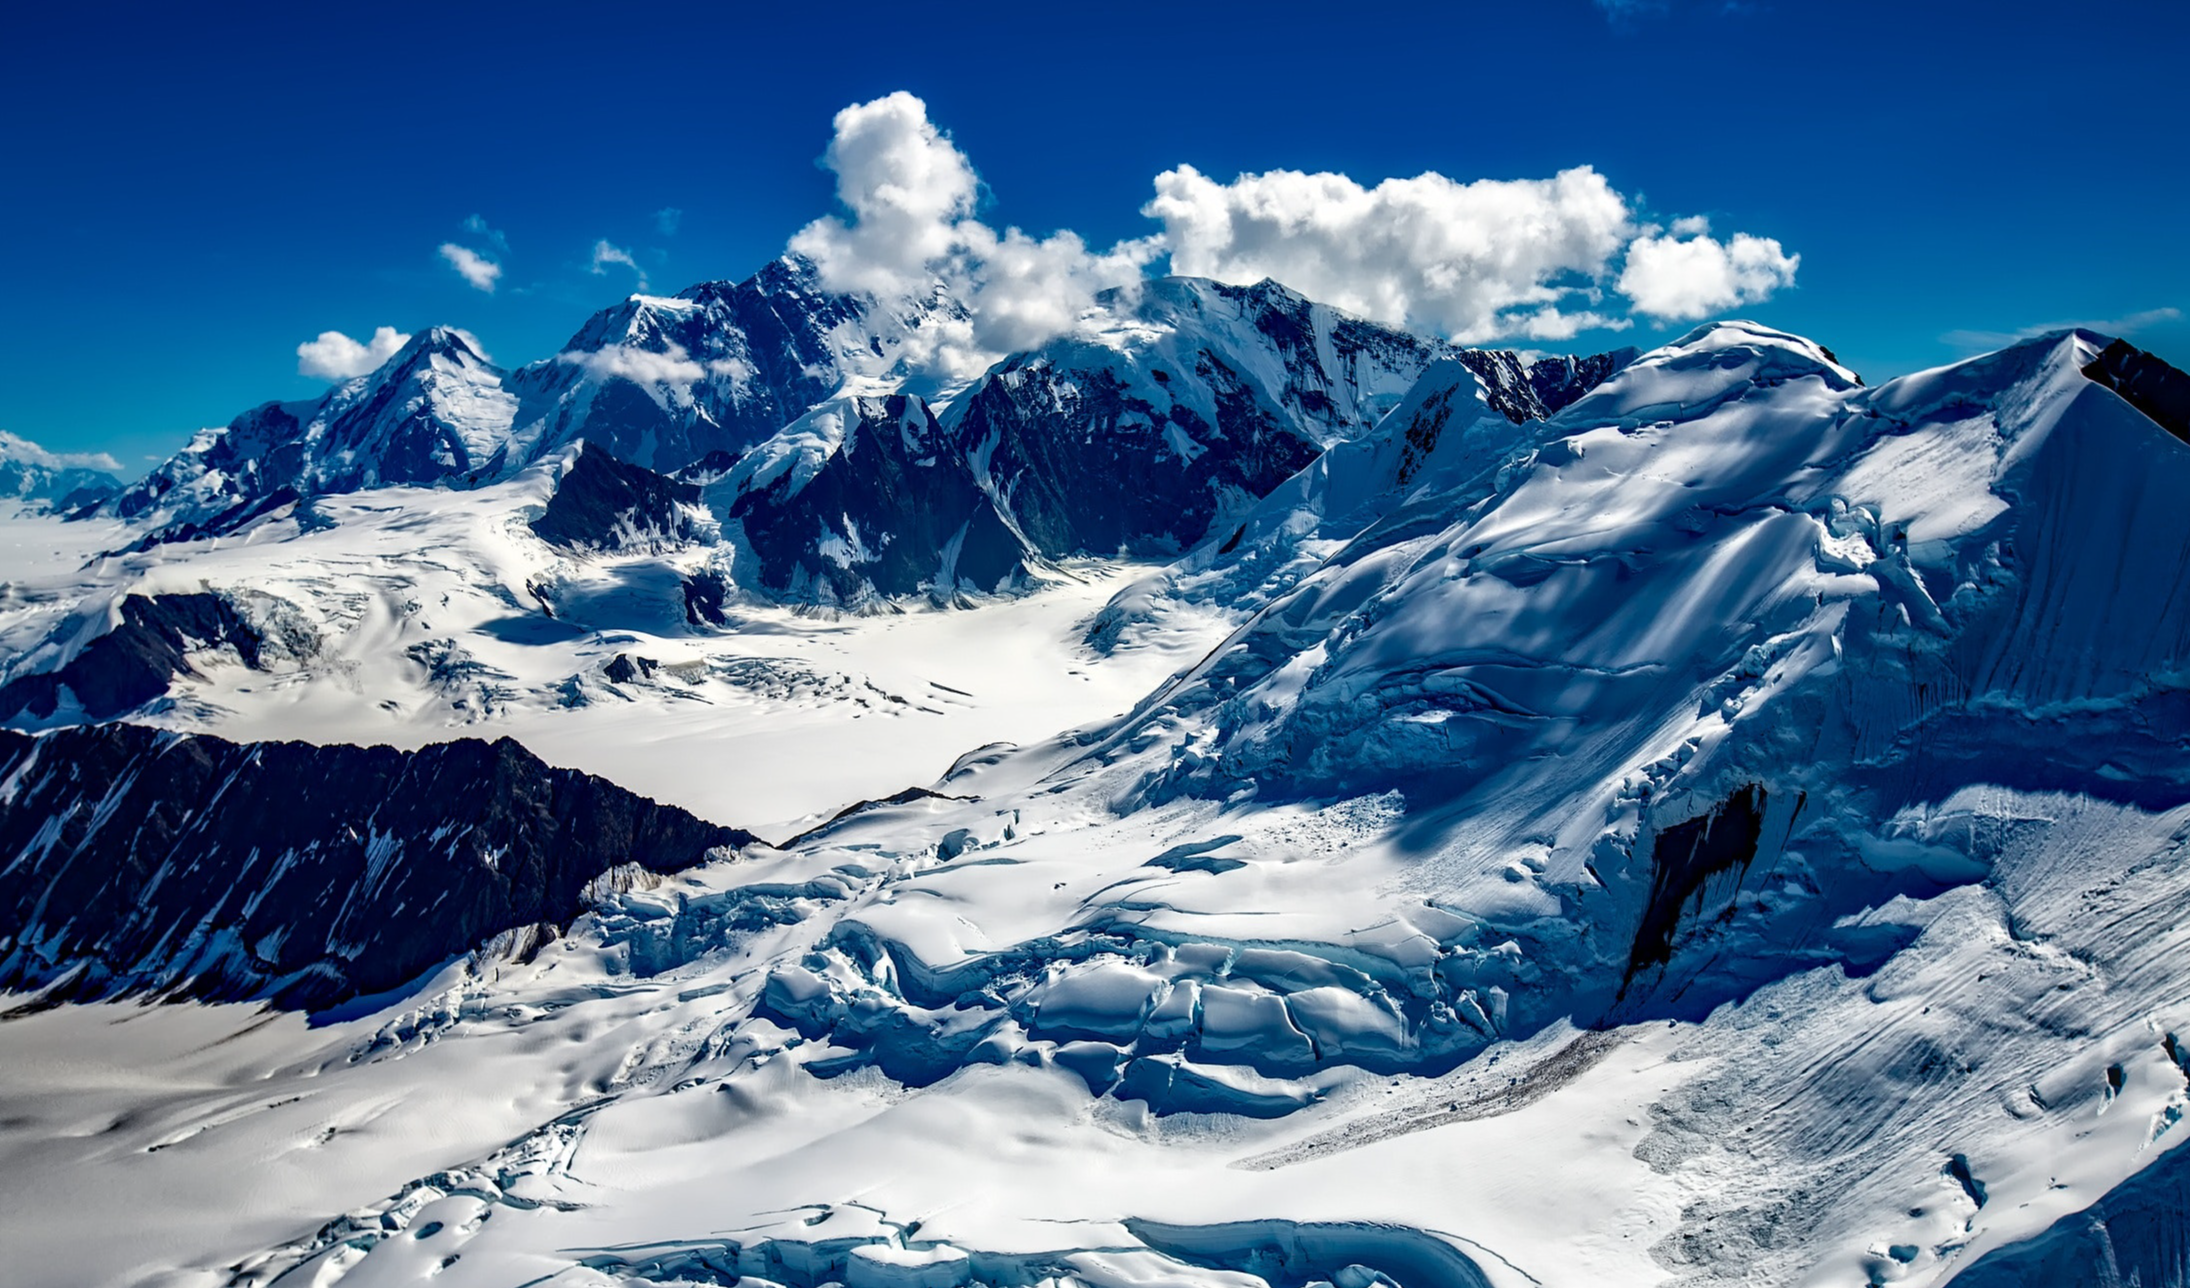 vibrant image of snow covered mountains with bright blue sky